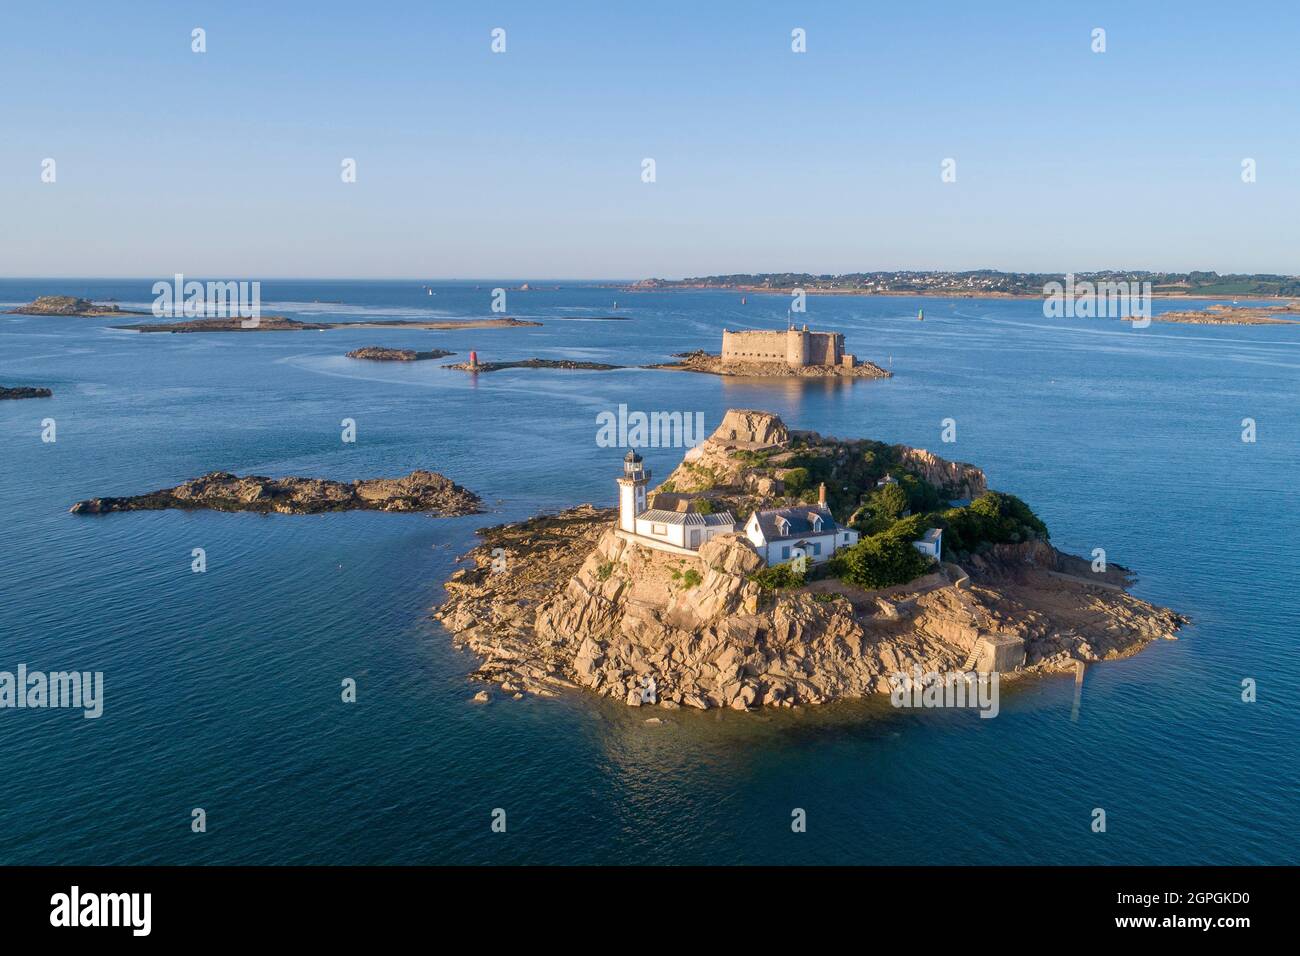 France, Finistere, Morlaix bay, Carantec, Louet island and Taureau castle built by Vauban in the 17th century (aerial view) Stock Photo